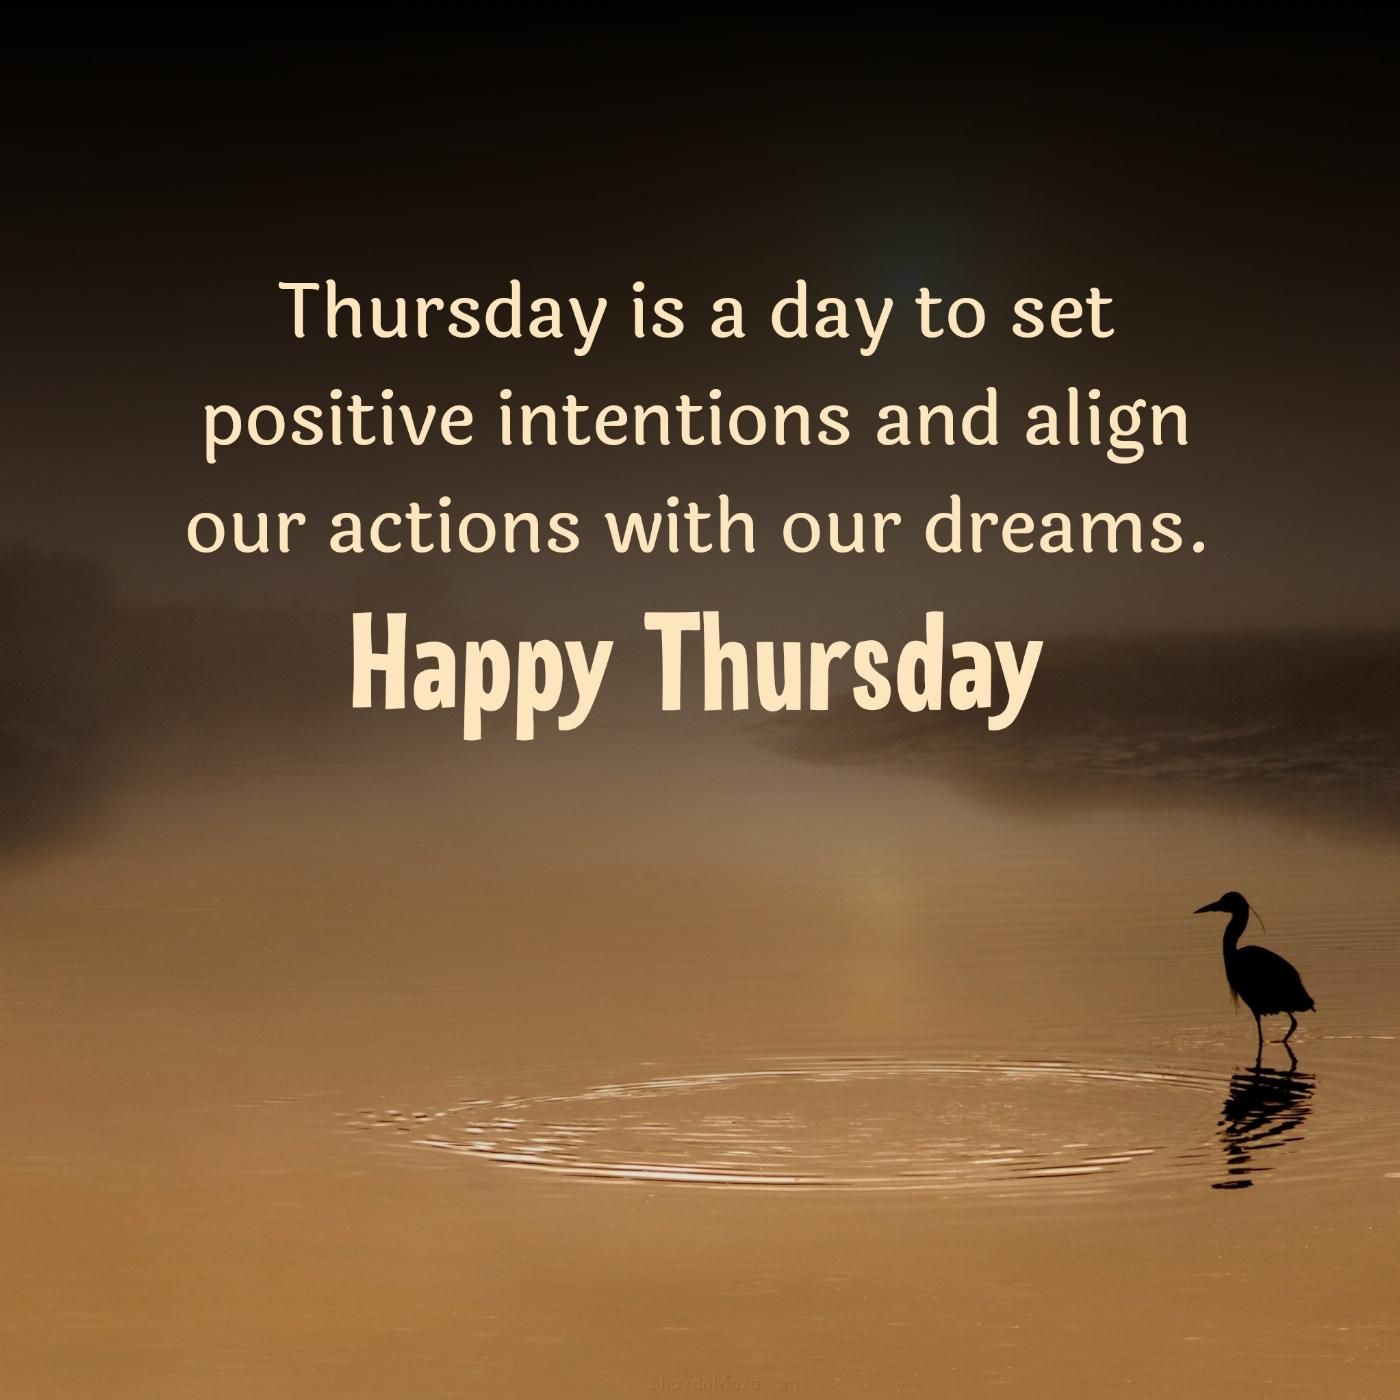 Thursday is a day to set positive intentions and align our actions